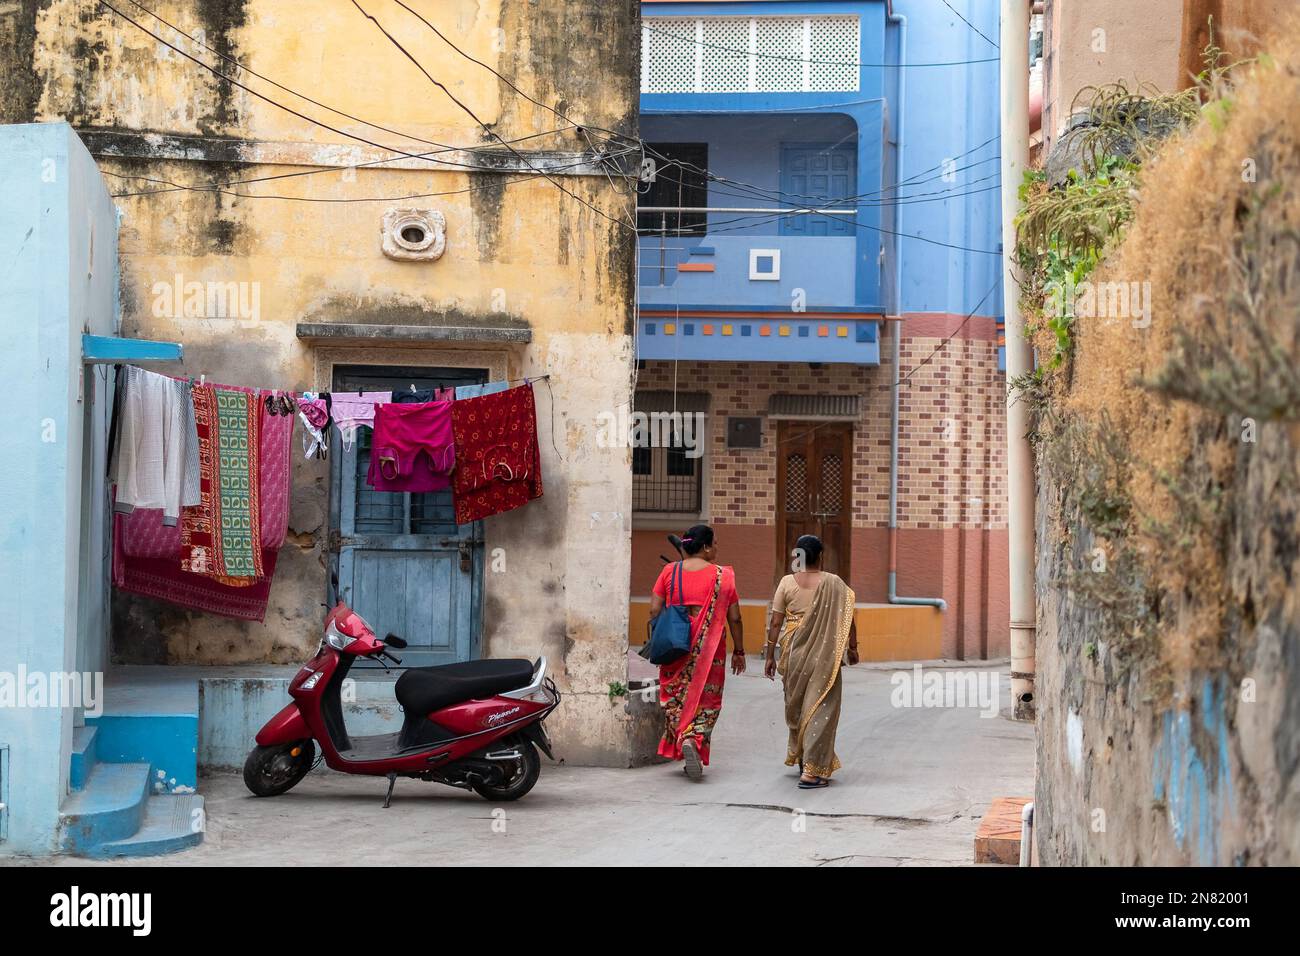 Diu, India - December 2018: Rear view of two women walking through a narrow alley in an old neighbourhood in the town of Diu. Stock Photo